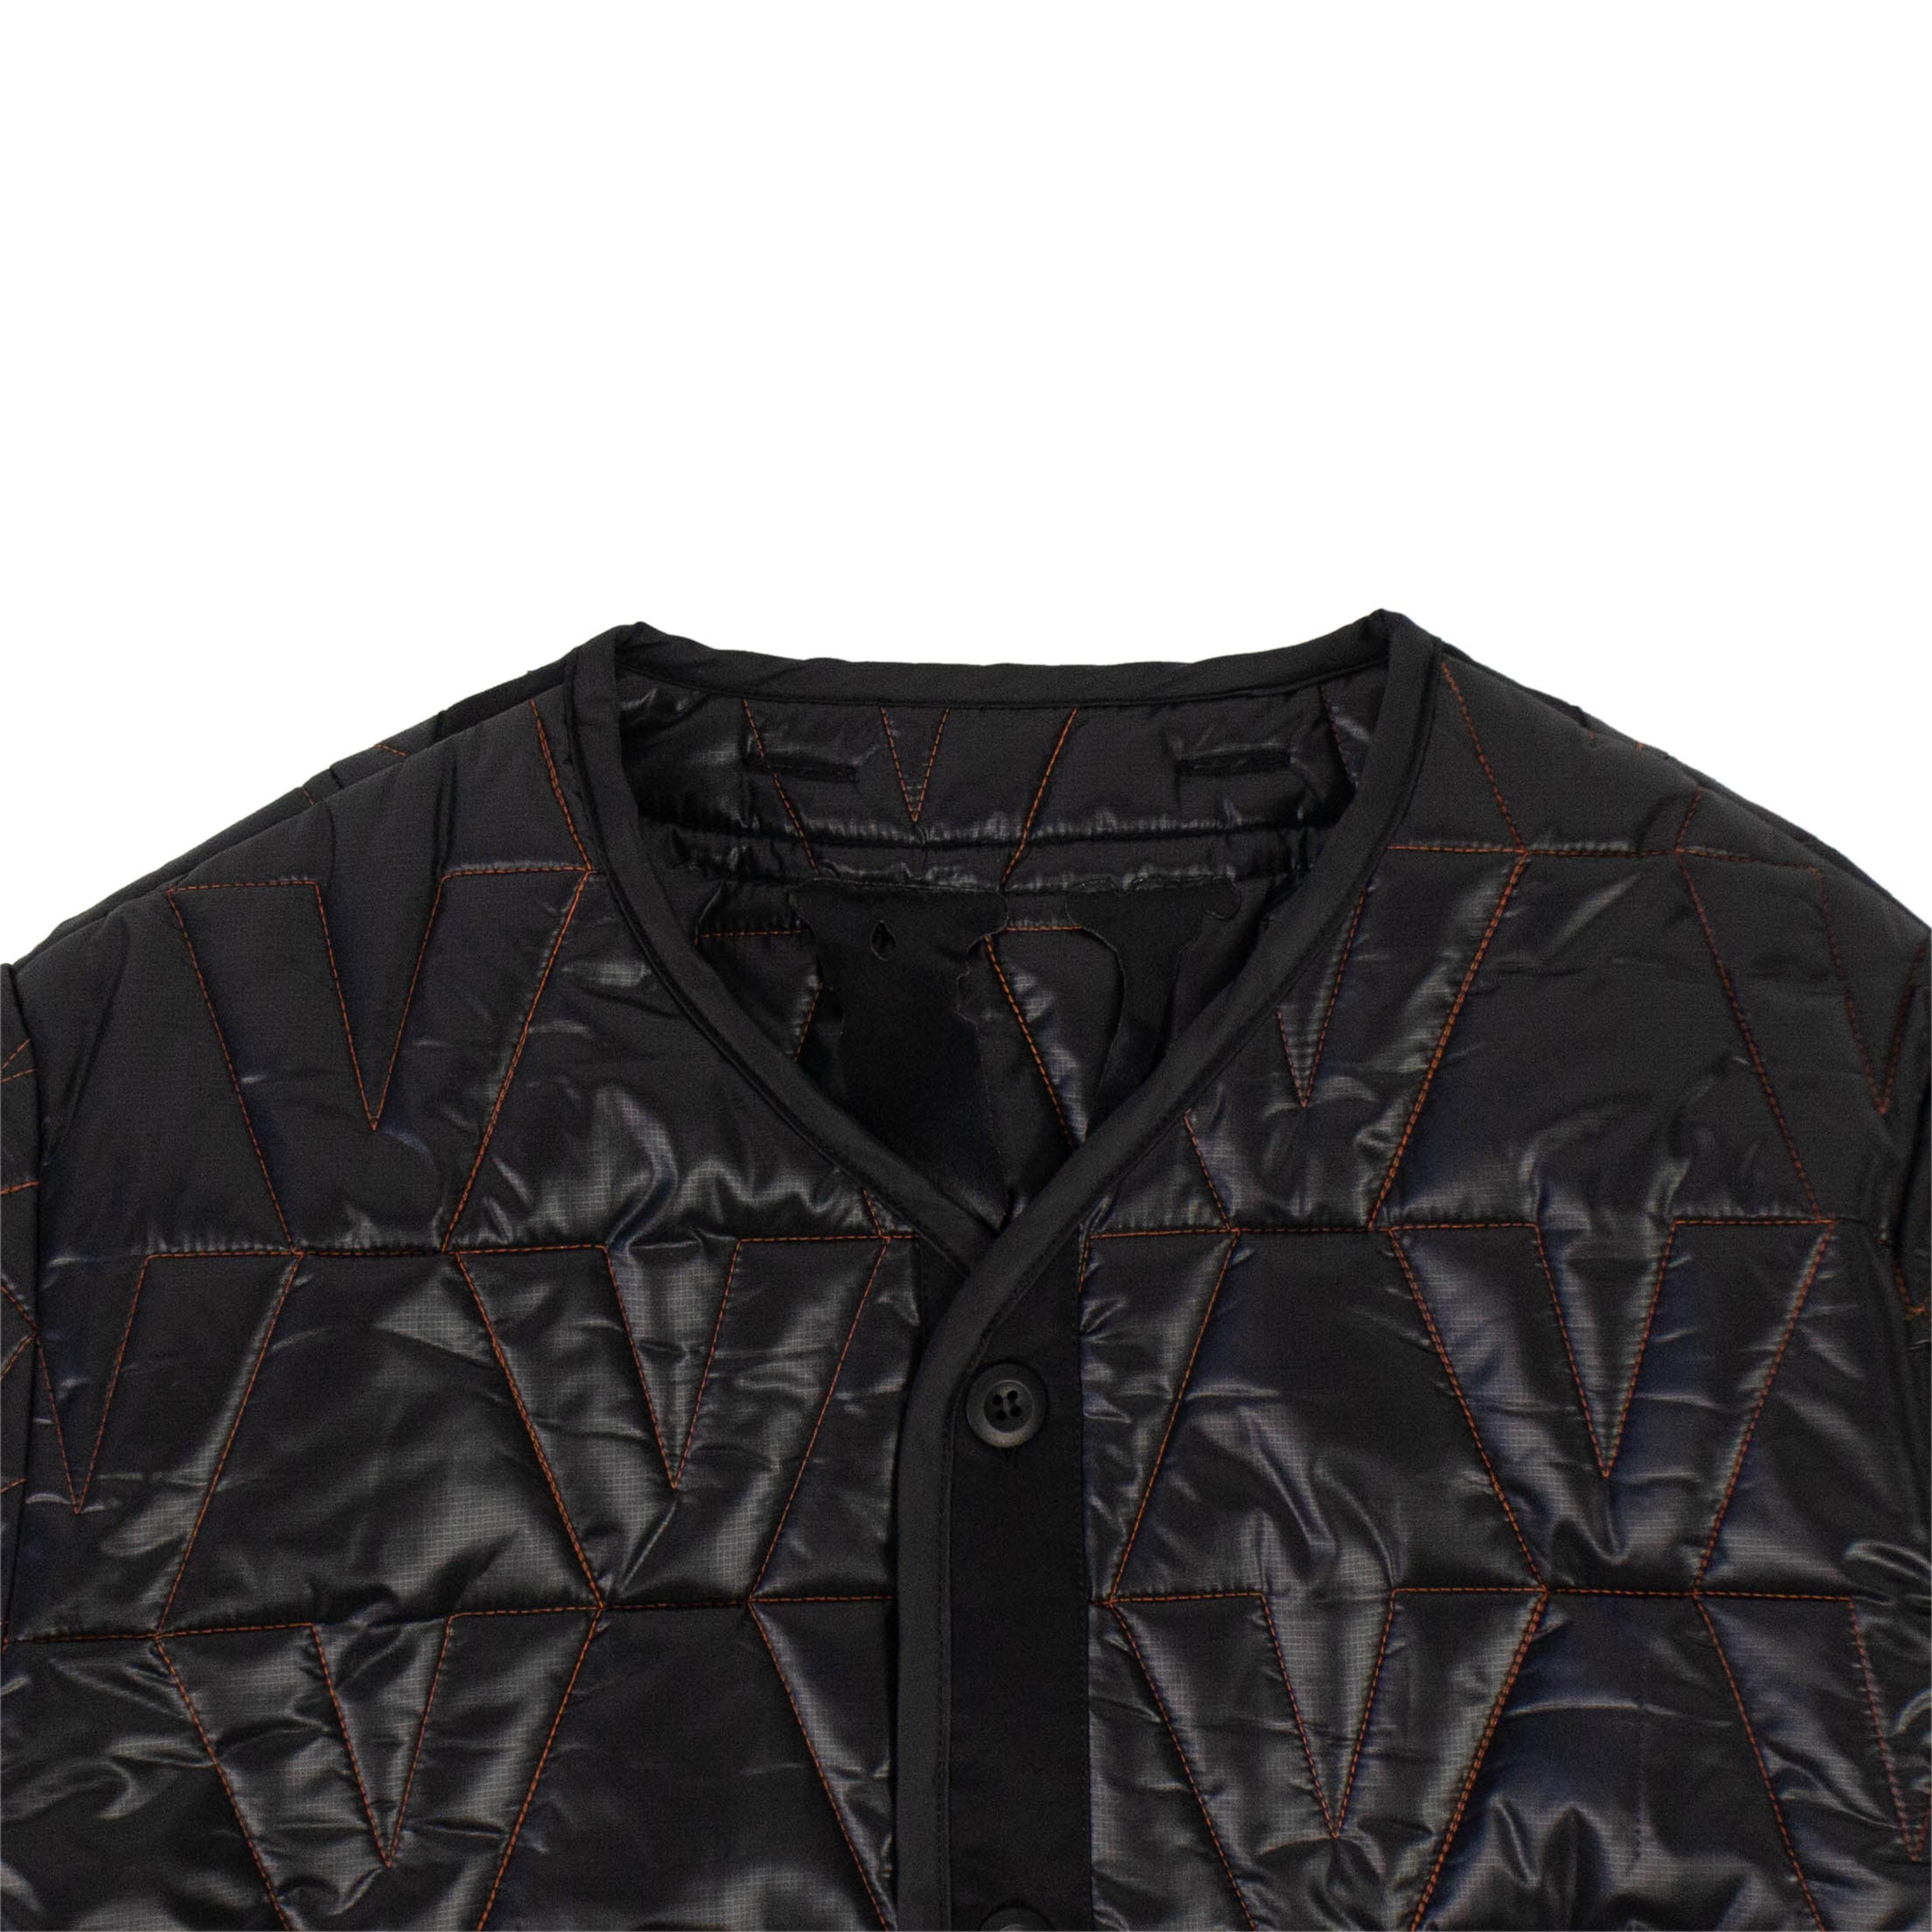 Alternate View 1 of Black Quilted Jacket